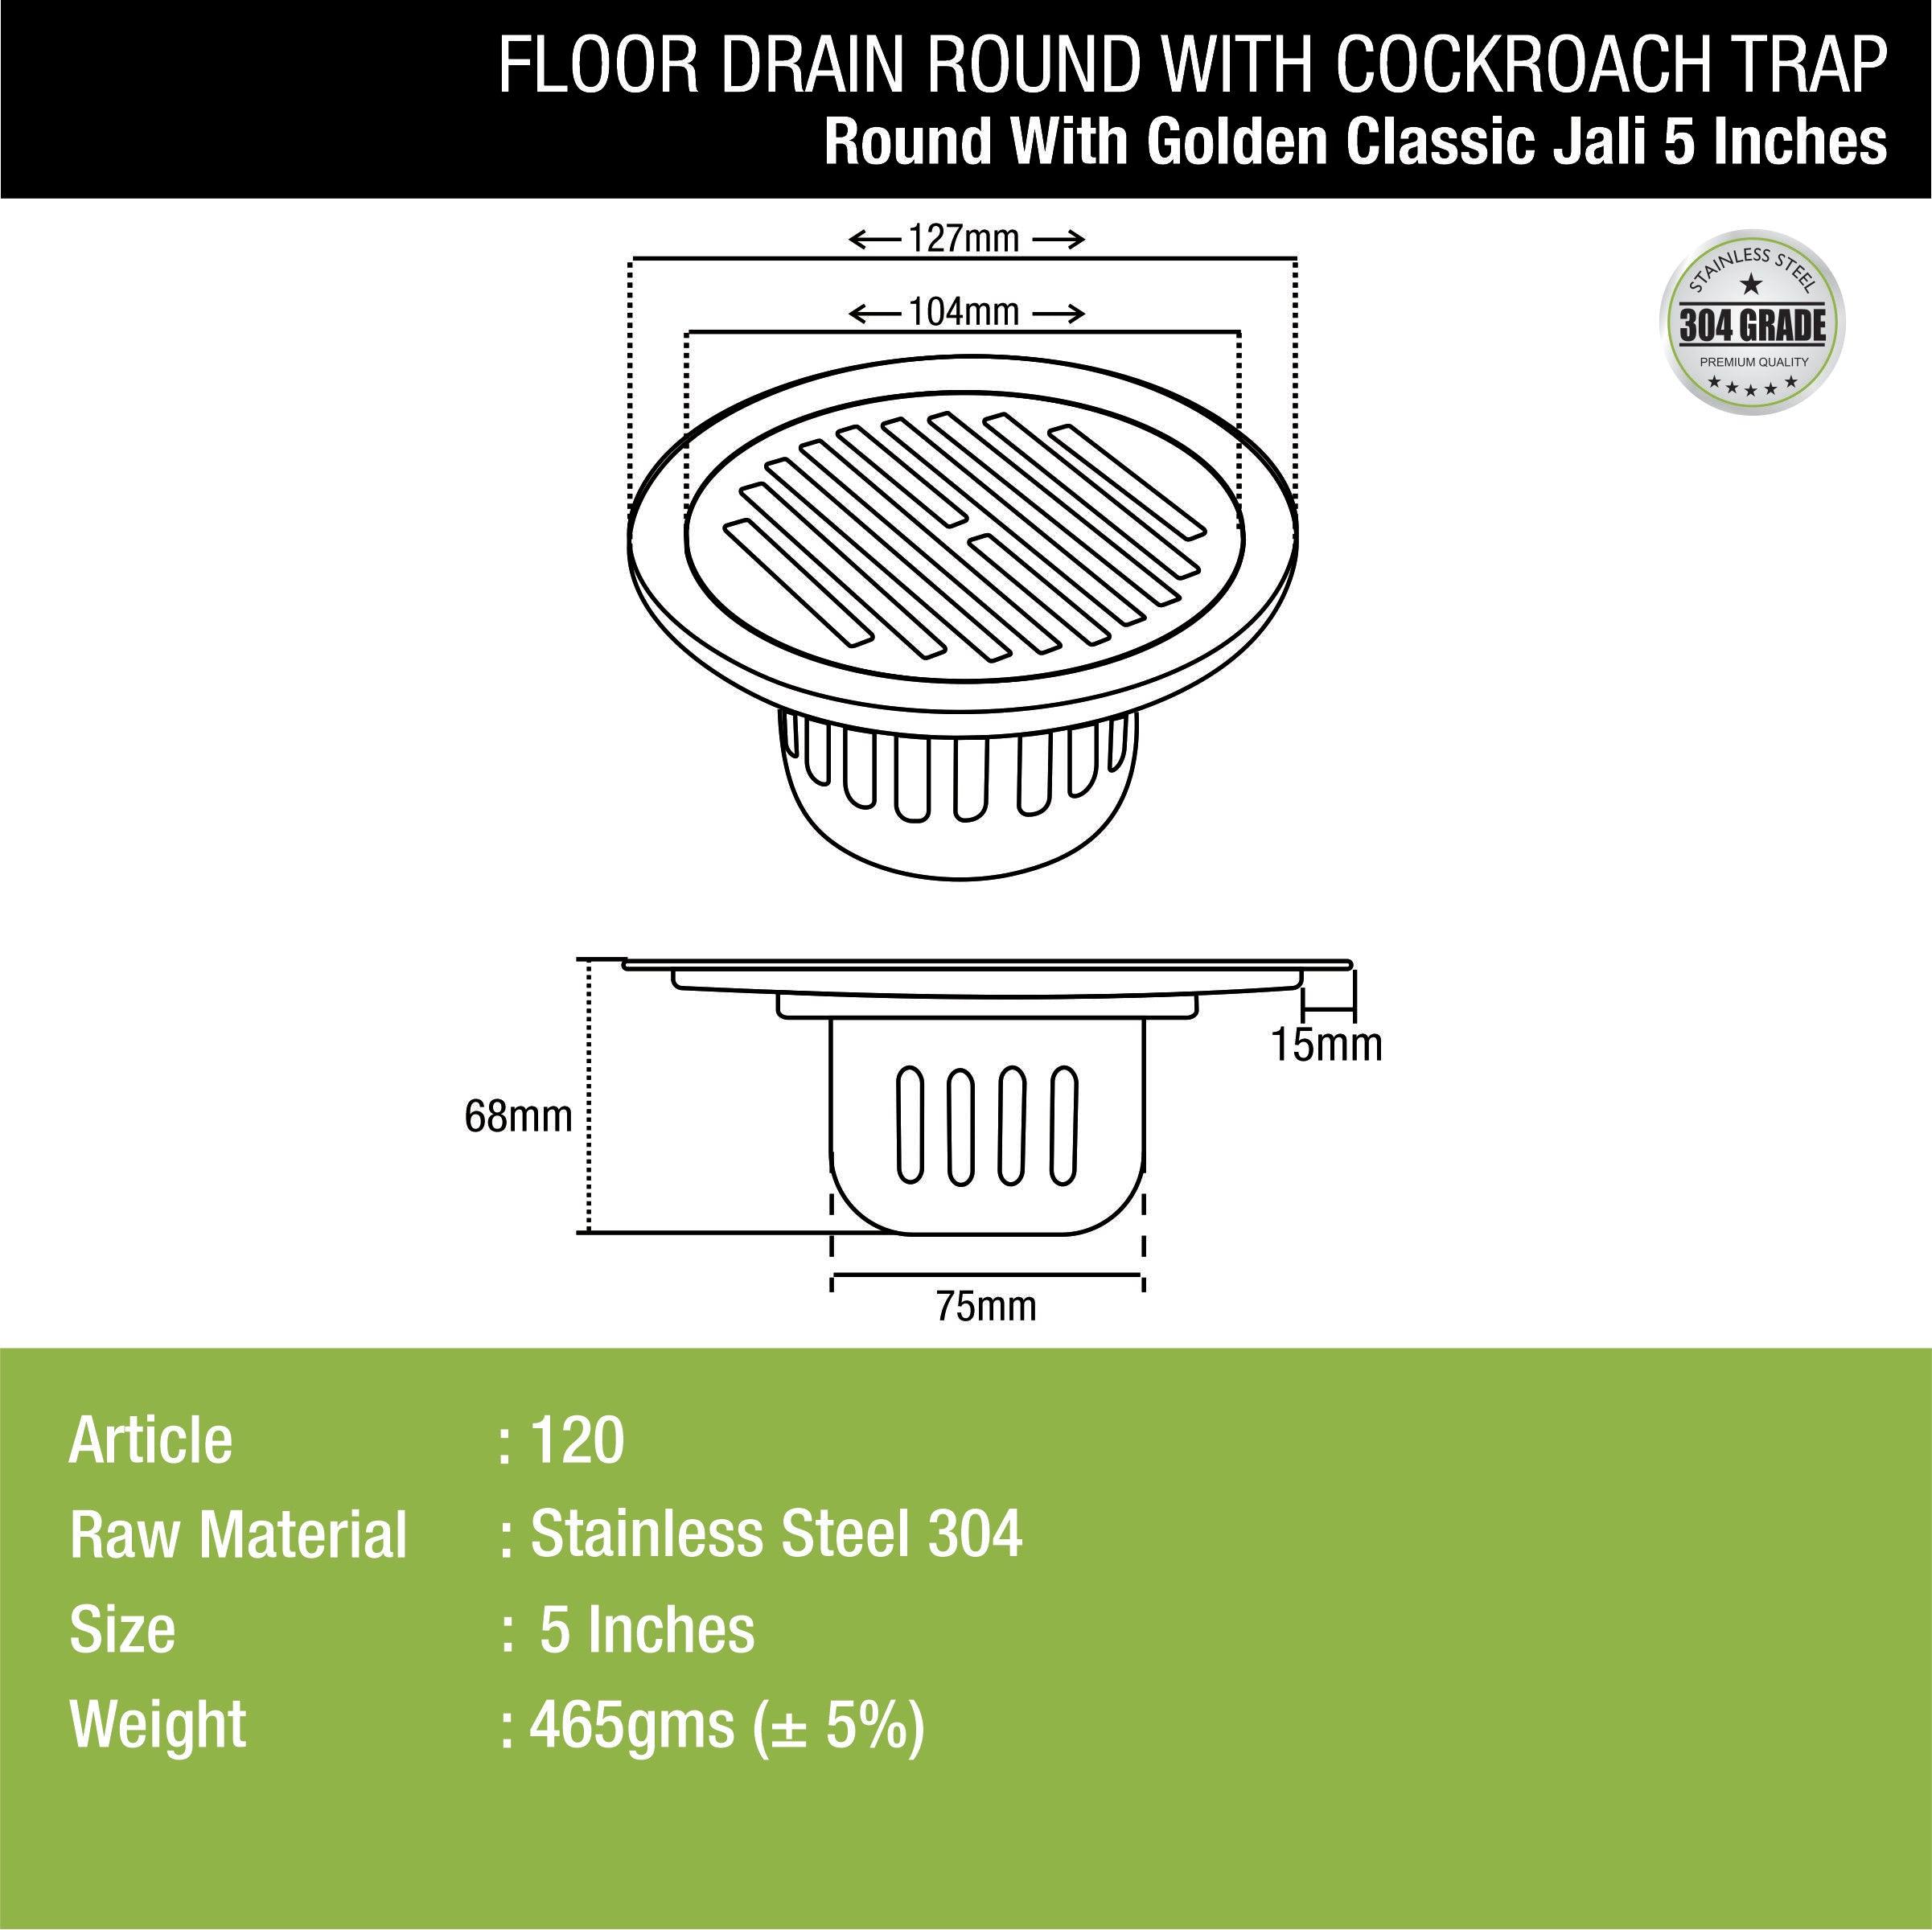 Golden Classic Jali Round Floor Drain (5 Inches) with Cockroach Trap dimensions and sizes